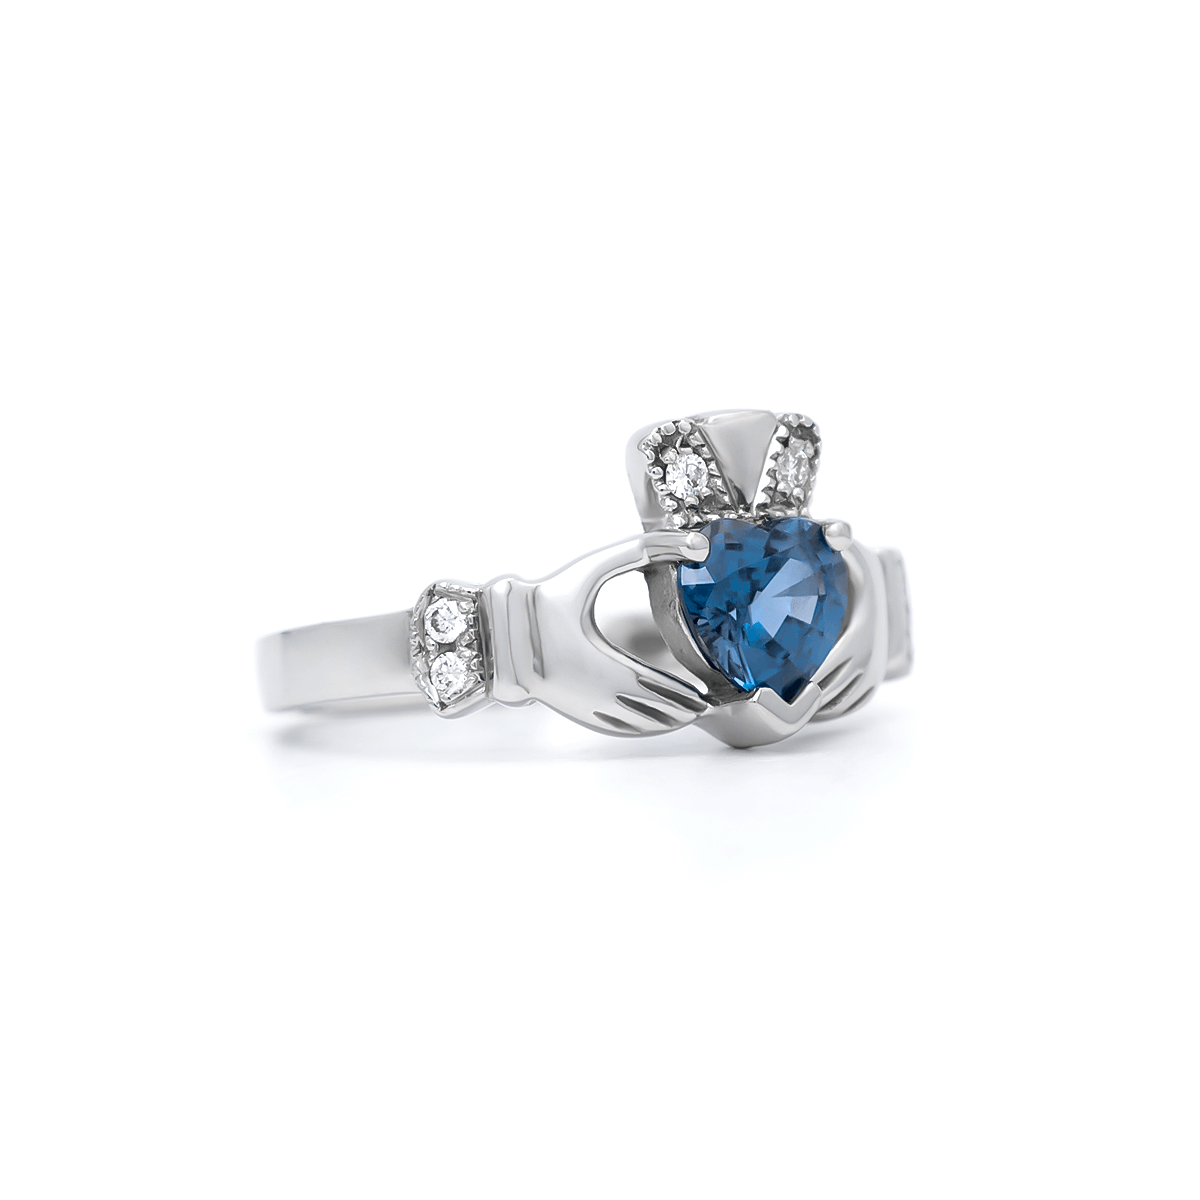 IJCR0035 White Gold Claddagh Ring With Sapphire 3